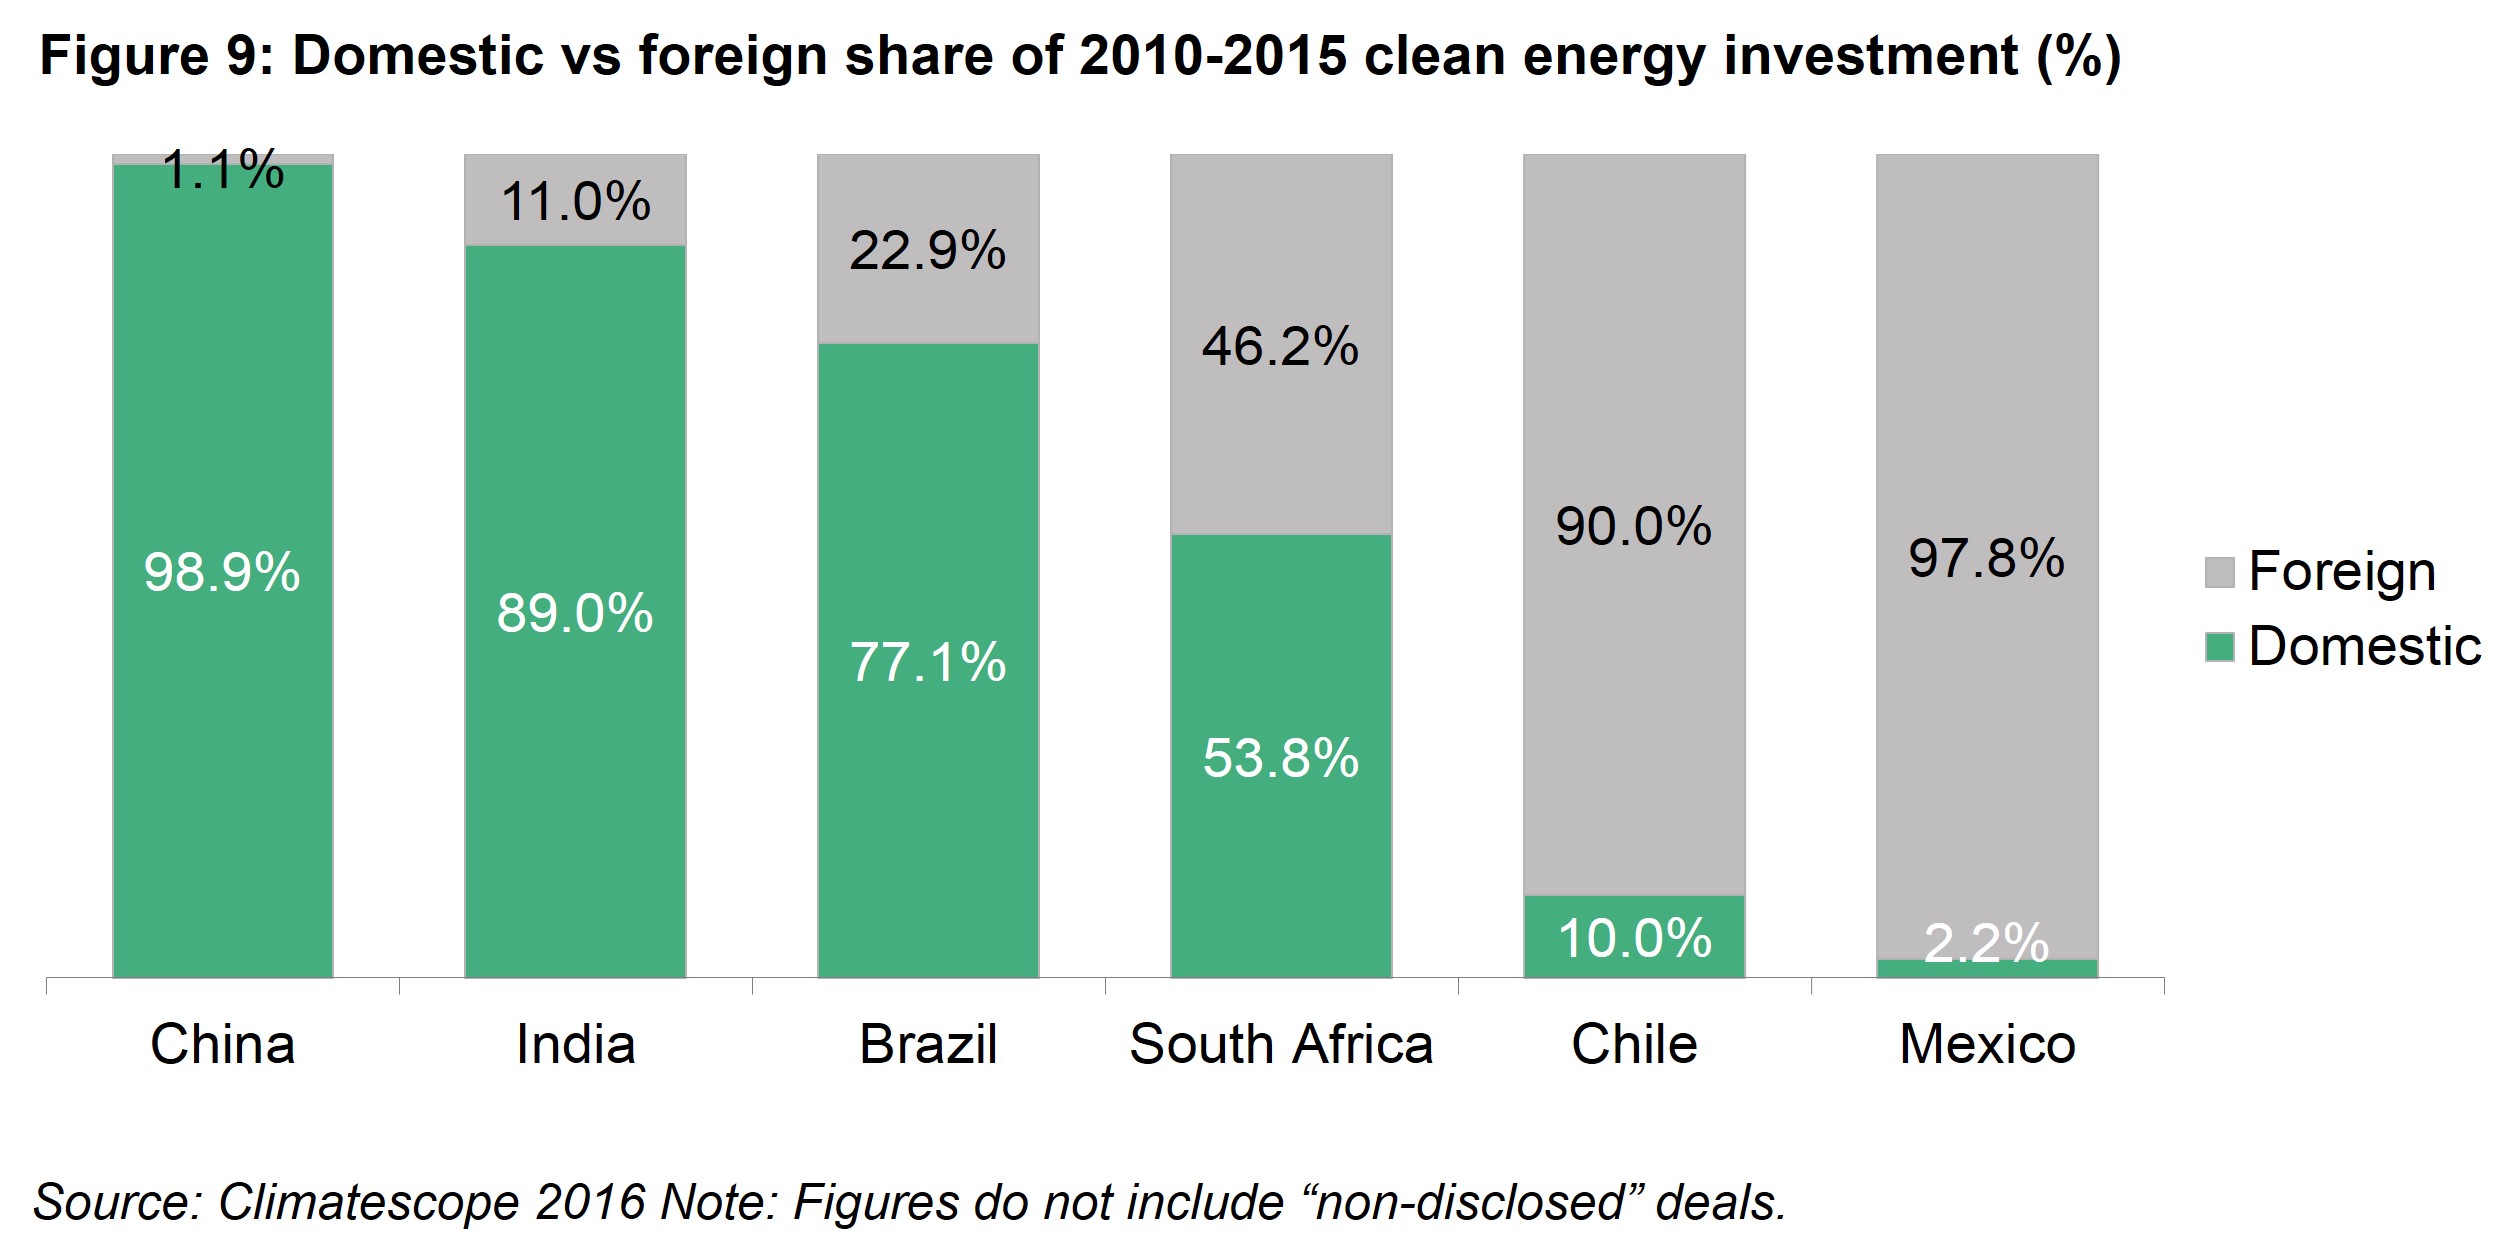 Executive Summary Fig 9 - Domestic vs foreign share of 2010-2015 clean energy investment (%)